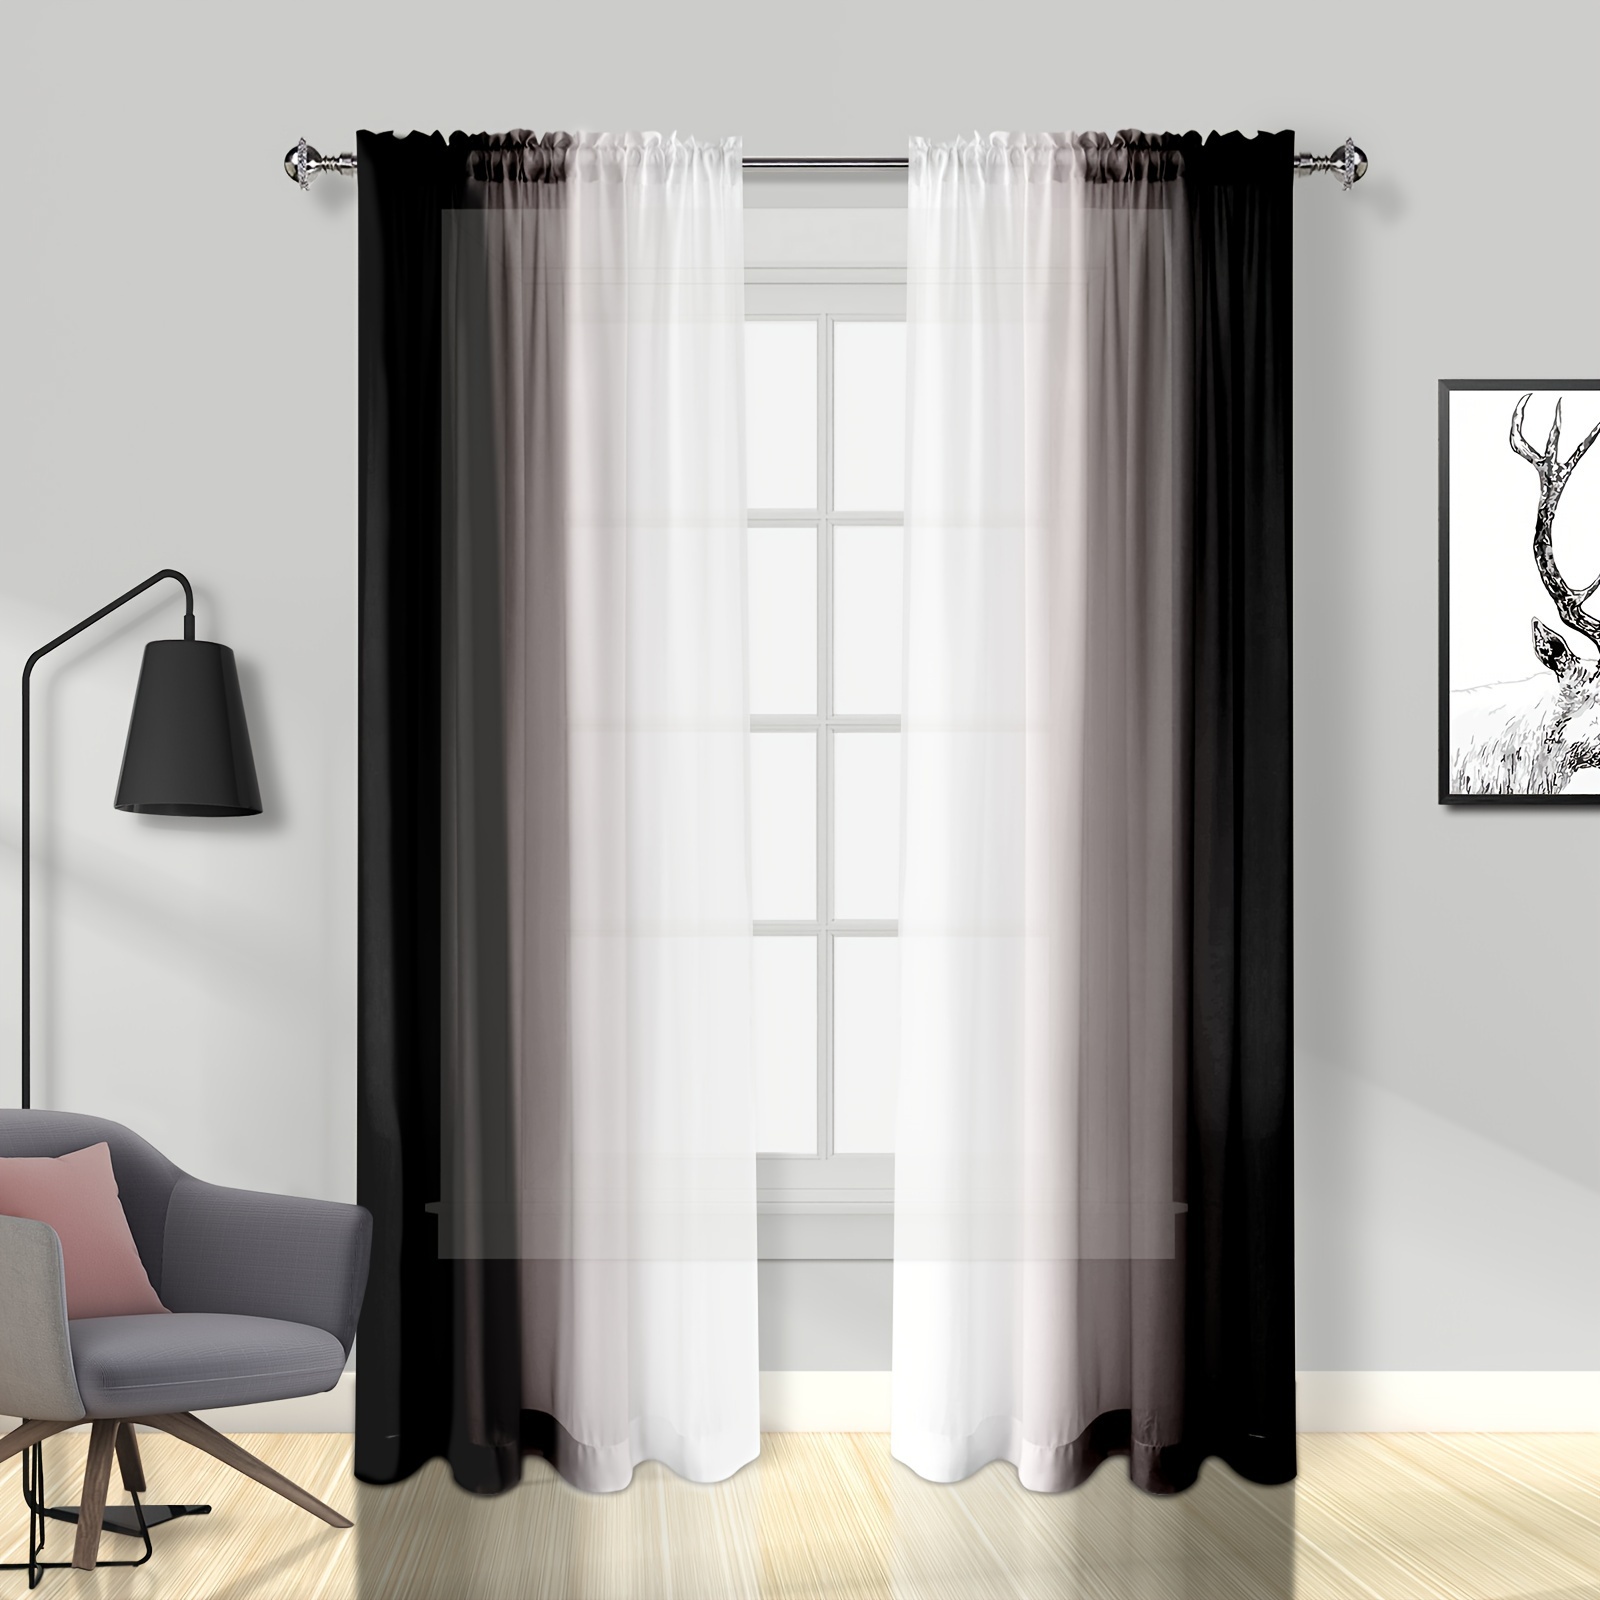 

2 Panels Ombre Sheer Curtains For Living Room, Bedroom Chiffon Black White Gradient Rod Pocket Voile Drapes